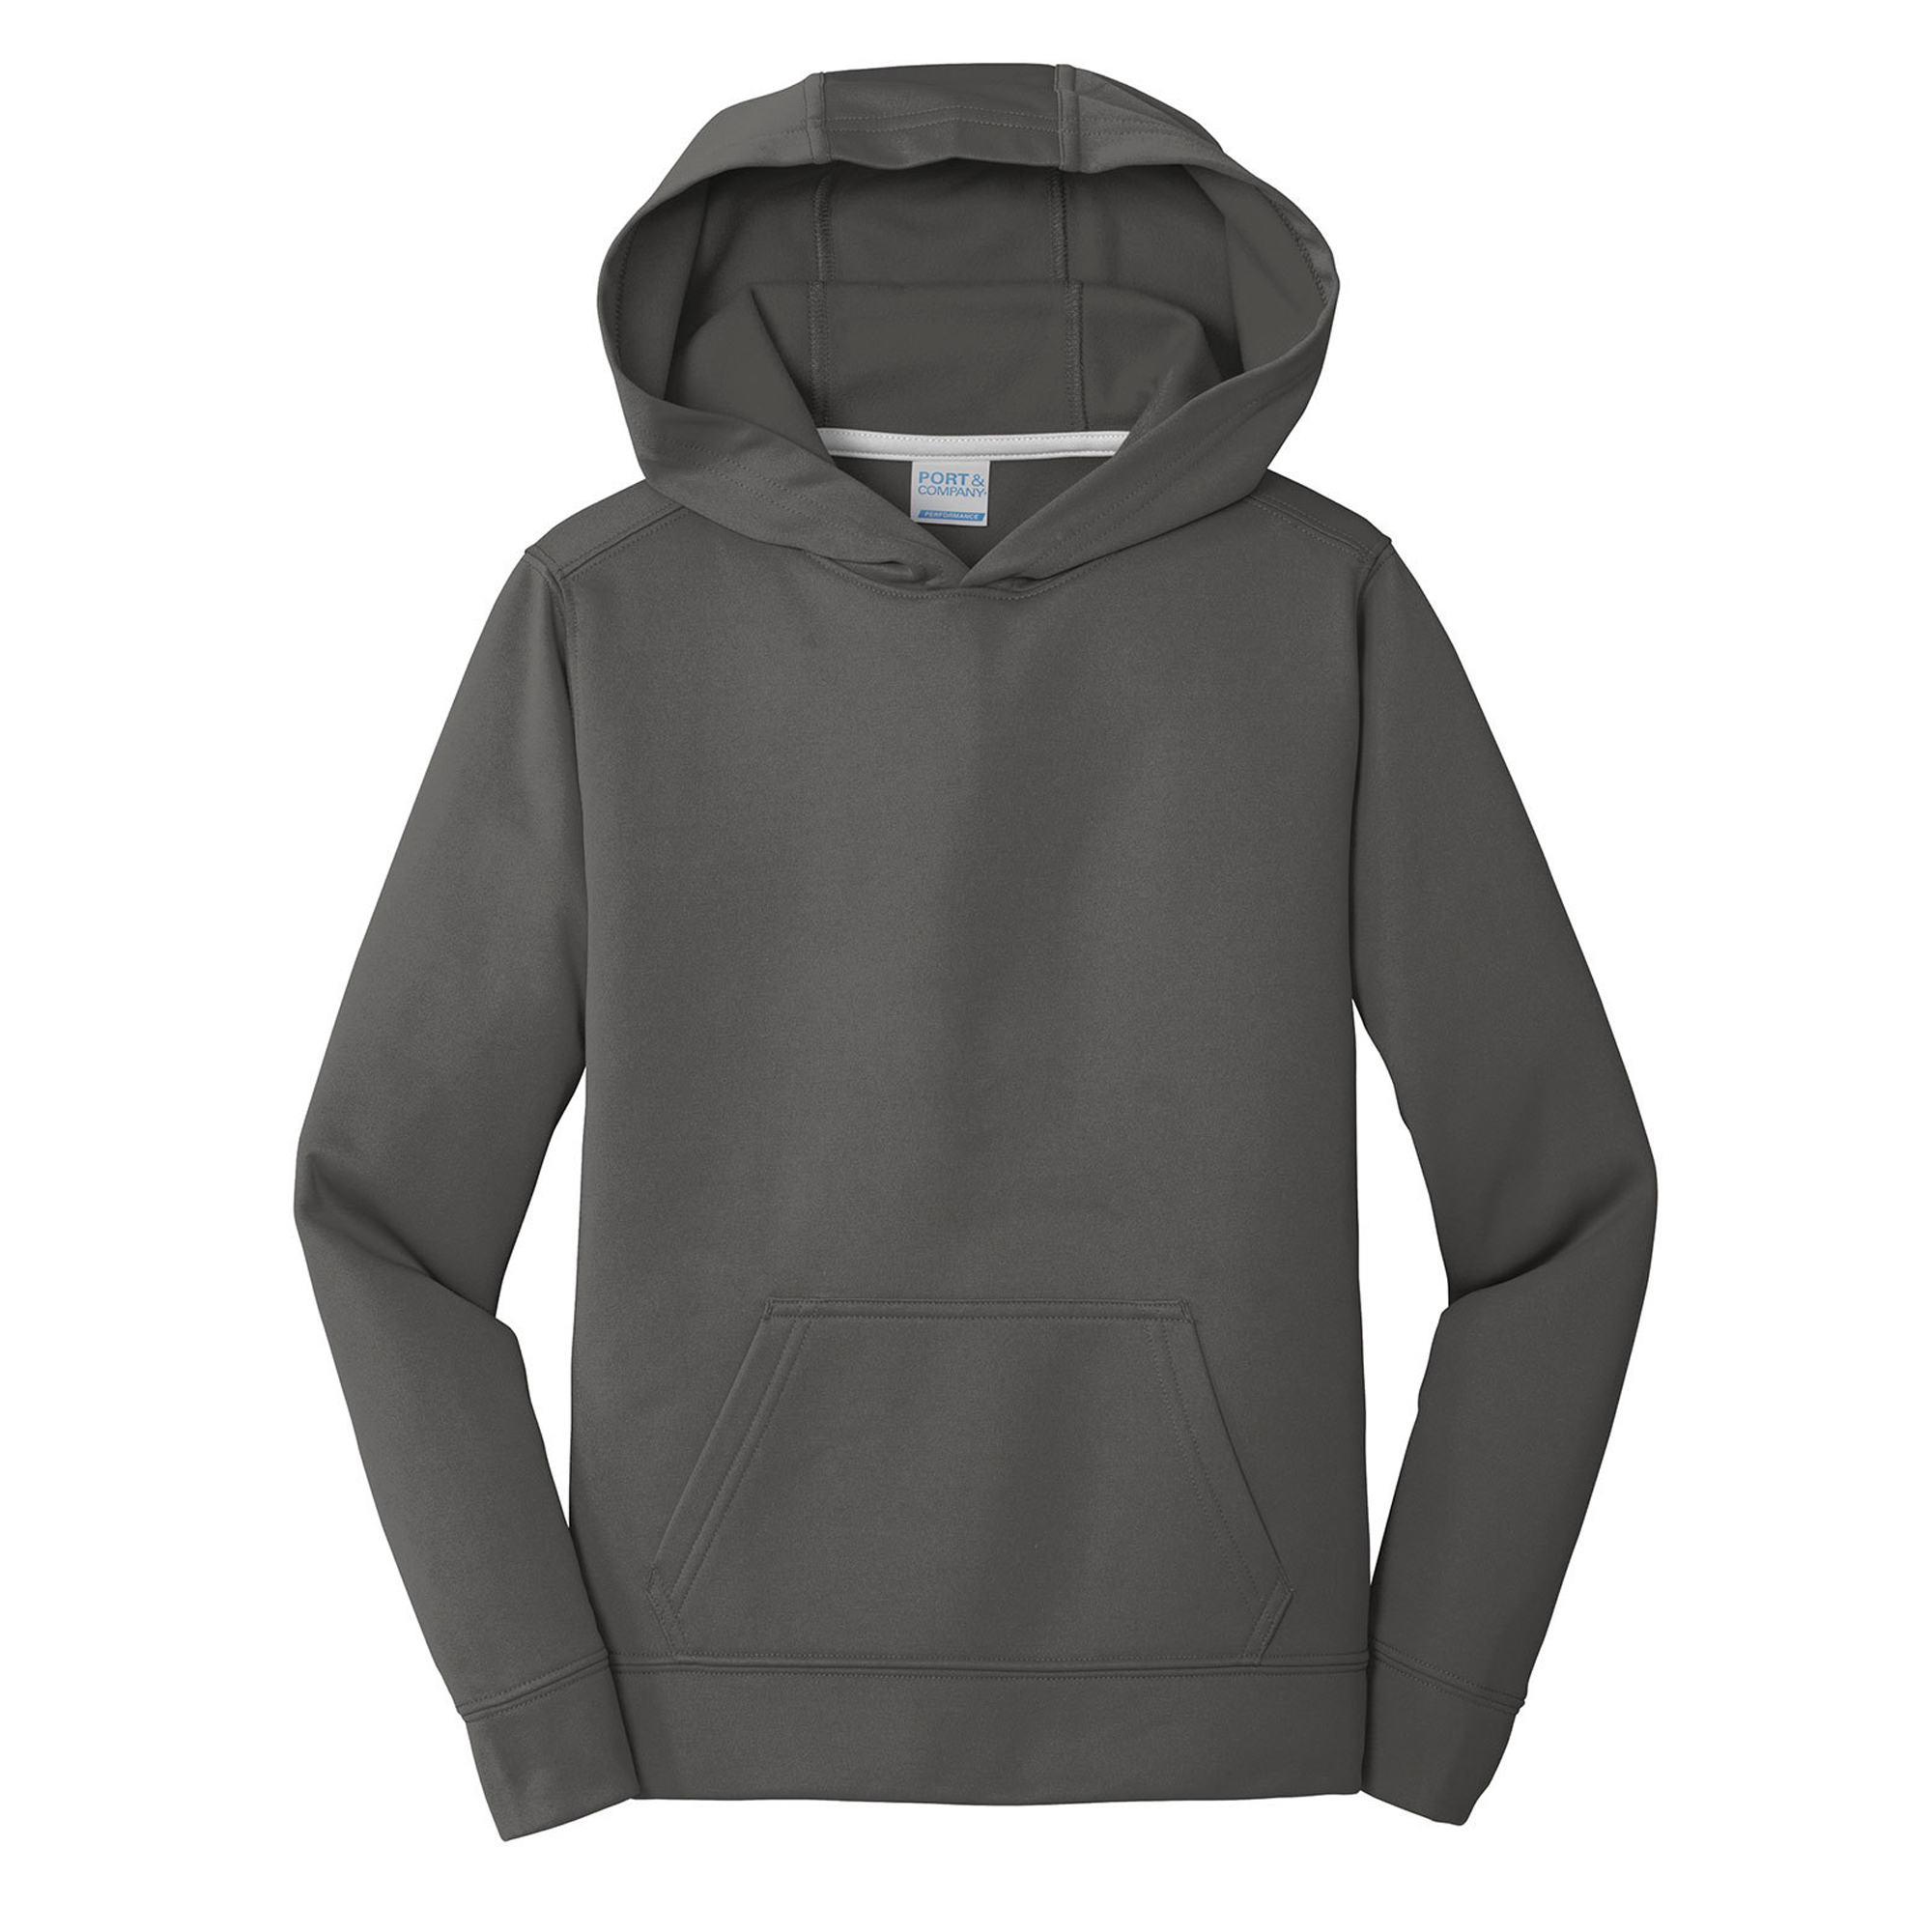 OFFICIAL USAT GRAND PRIX CENTRAL DRI FIT HOODIE -GREY